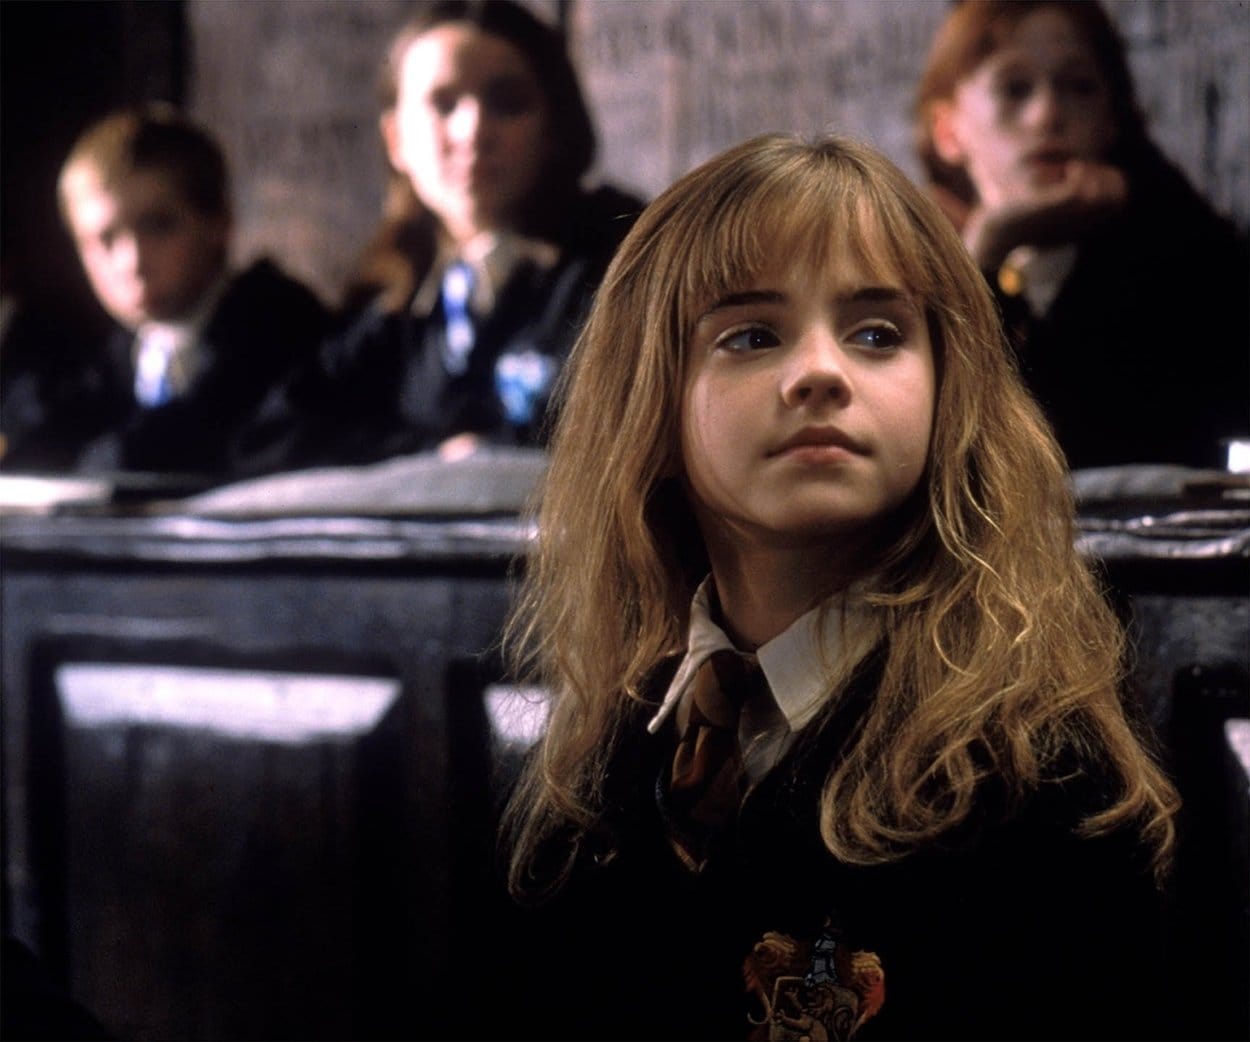 Emma Charlotte Duerre Watson was 11 years old when Harry Potter and the Philosopher